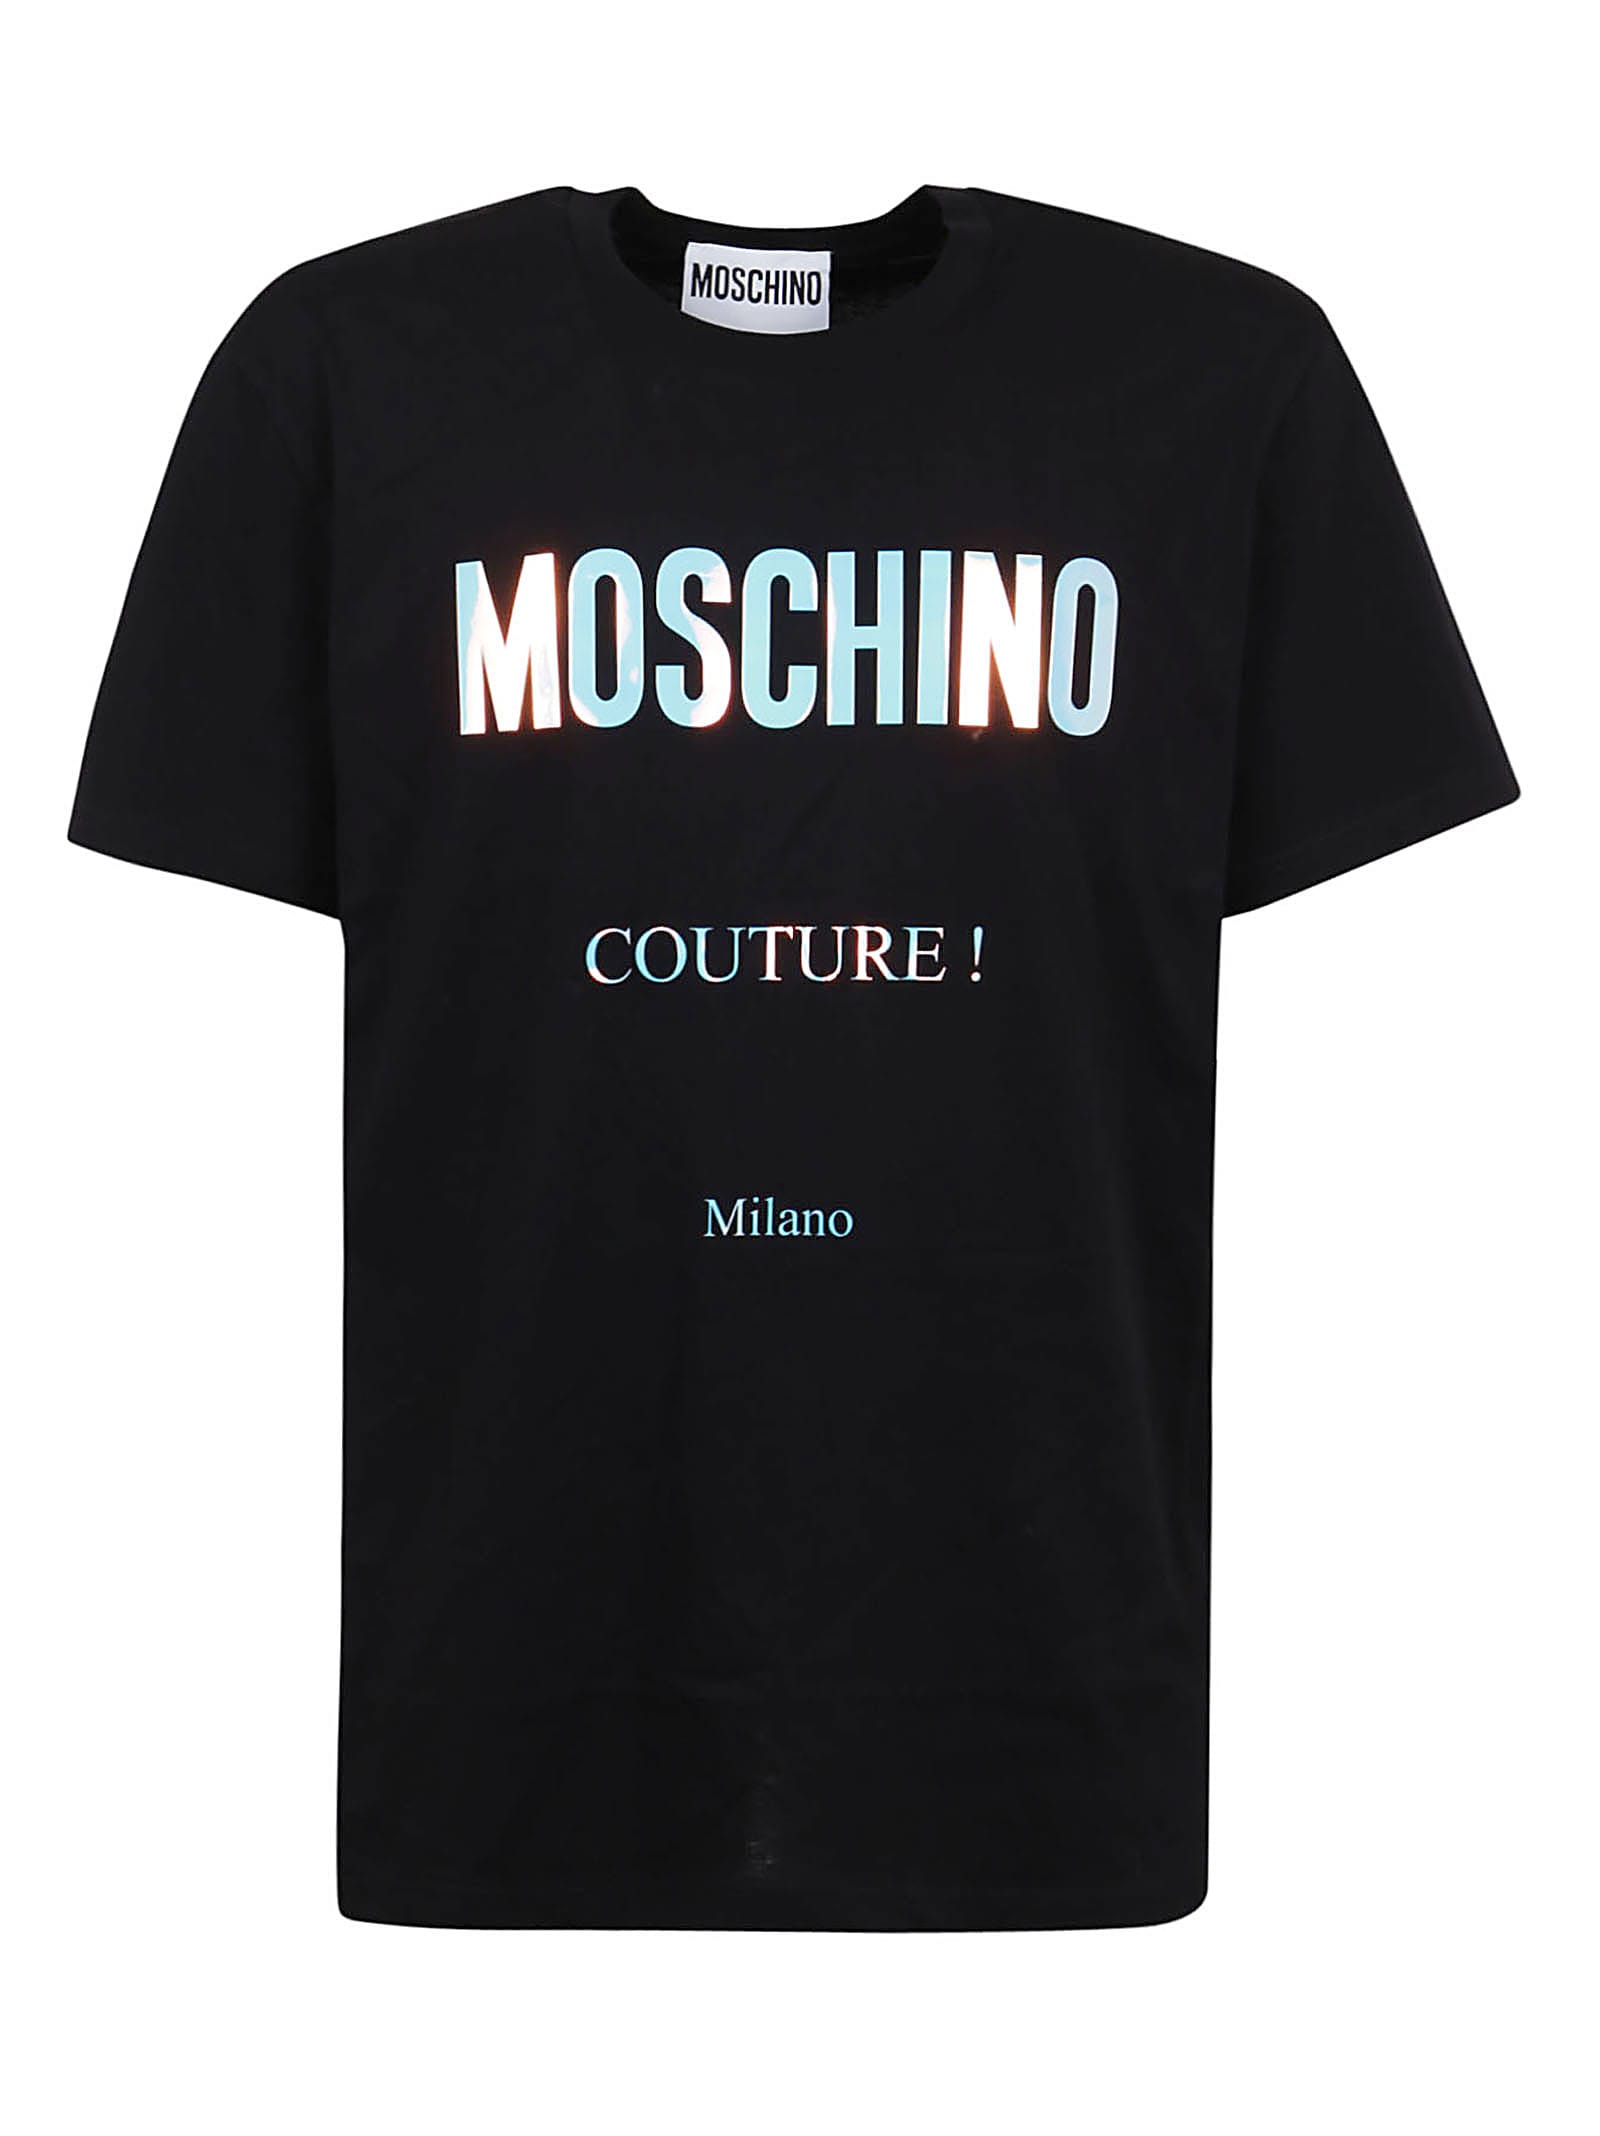 Moschino Couture Milano Hologr T-shirt